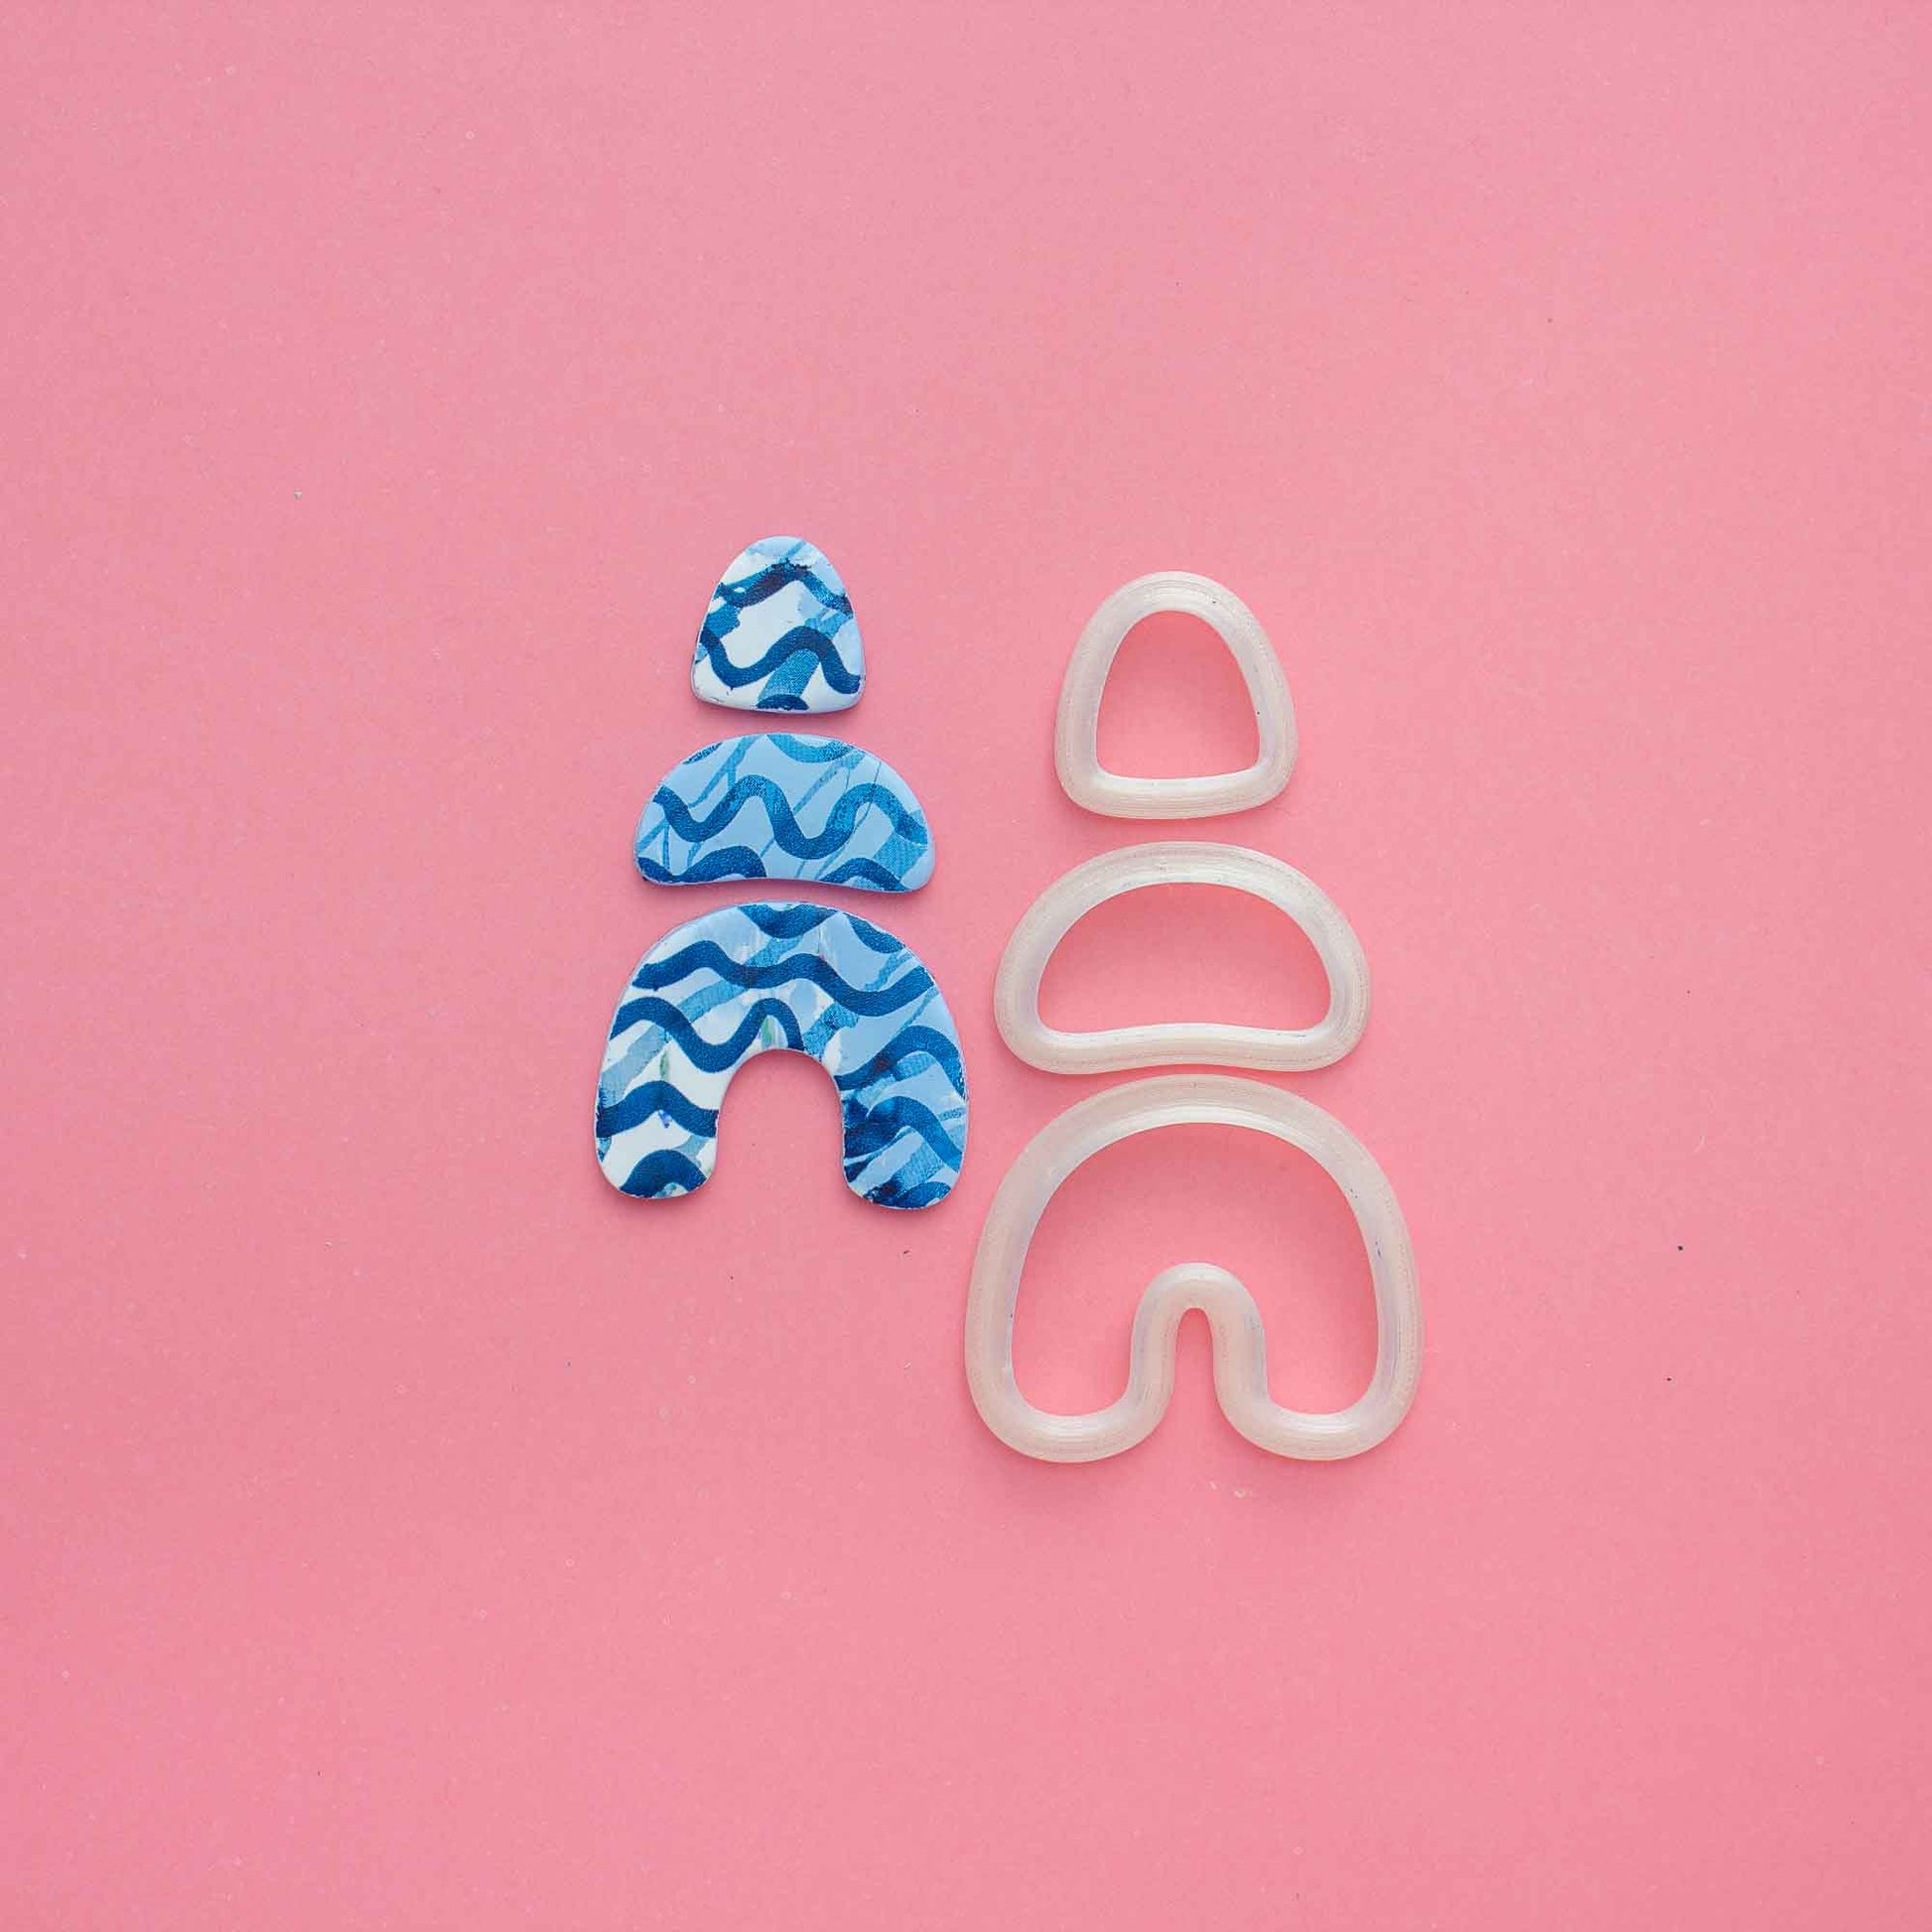 set of 3 organic clay shapes  and 3 clay cutters on a pink background